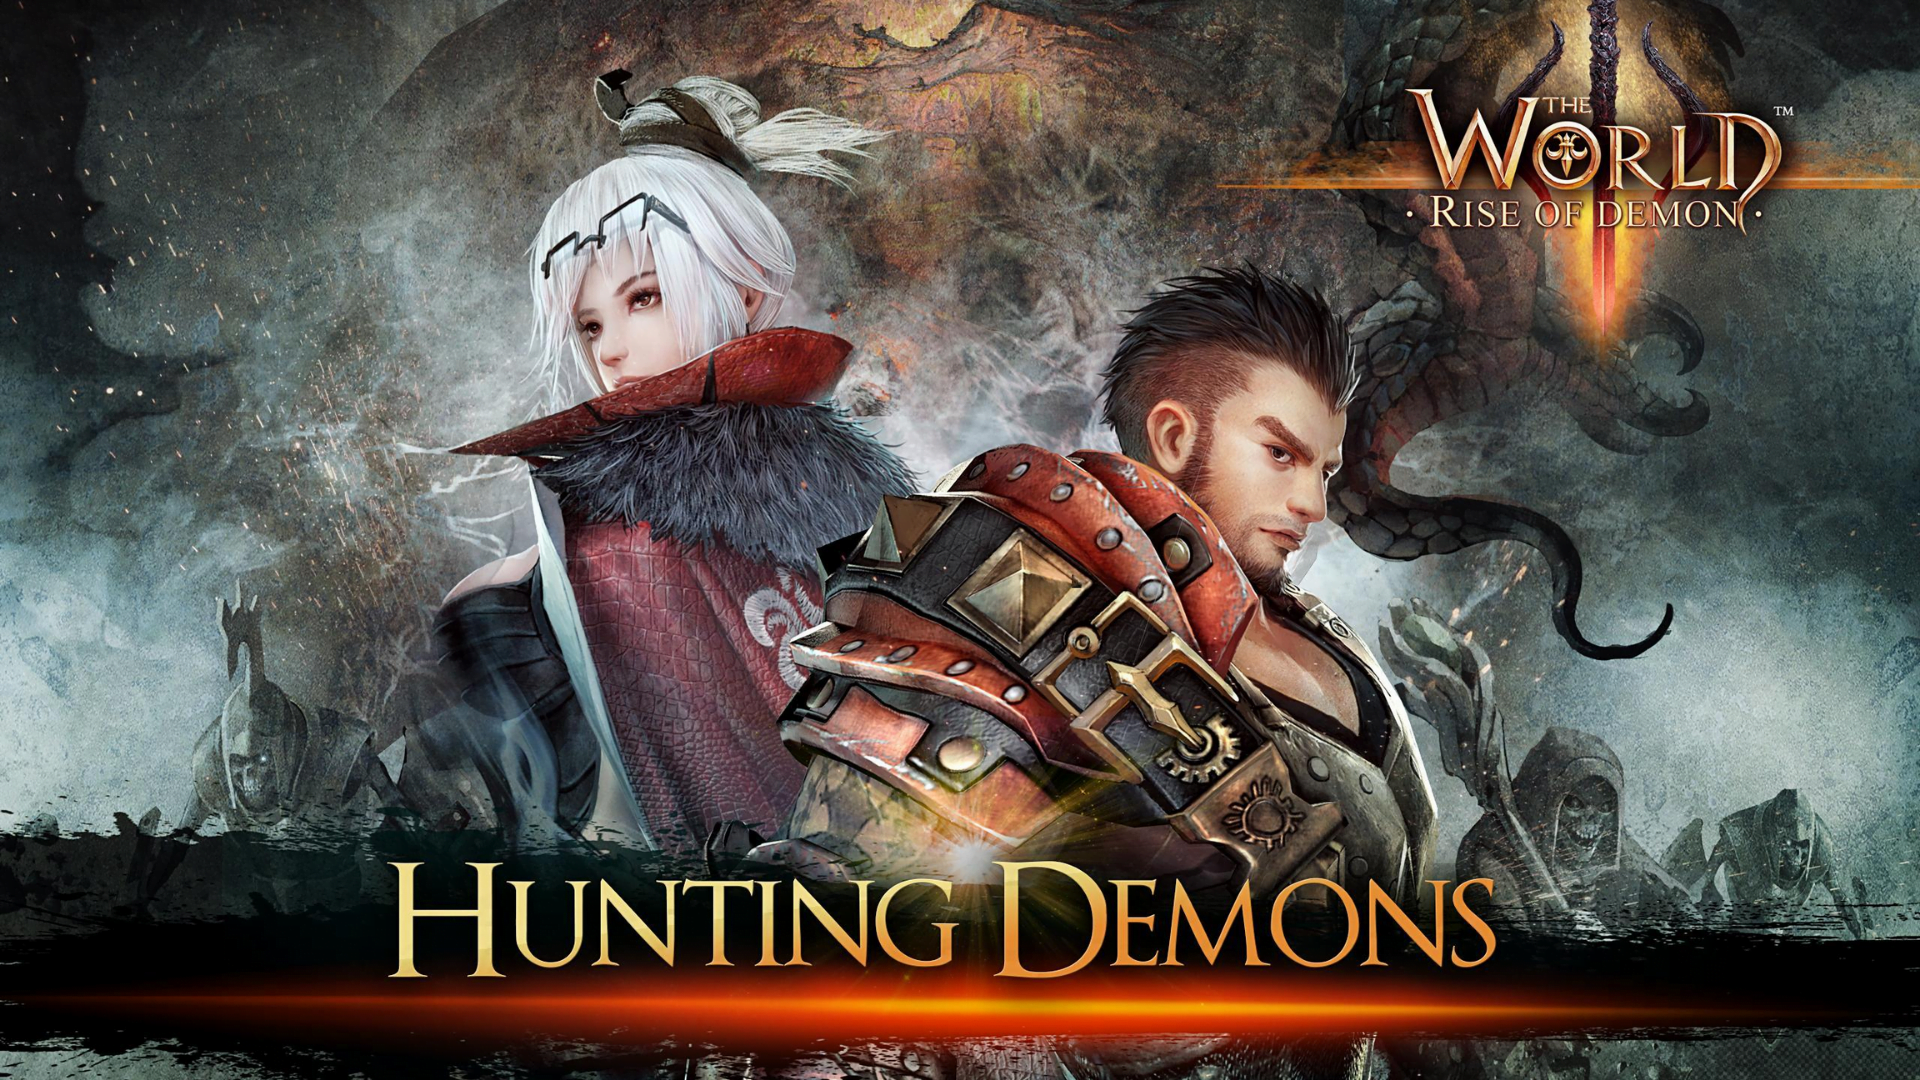 Download The World 3: Rise of Demon Game RPG